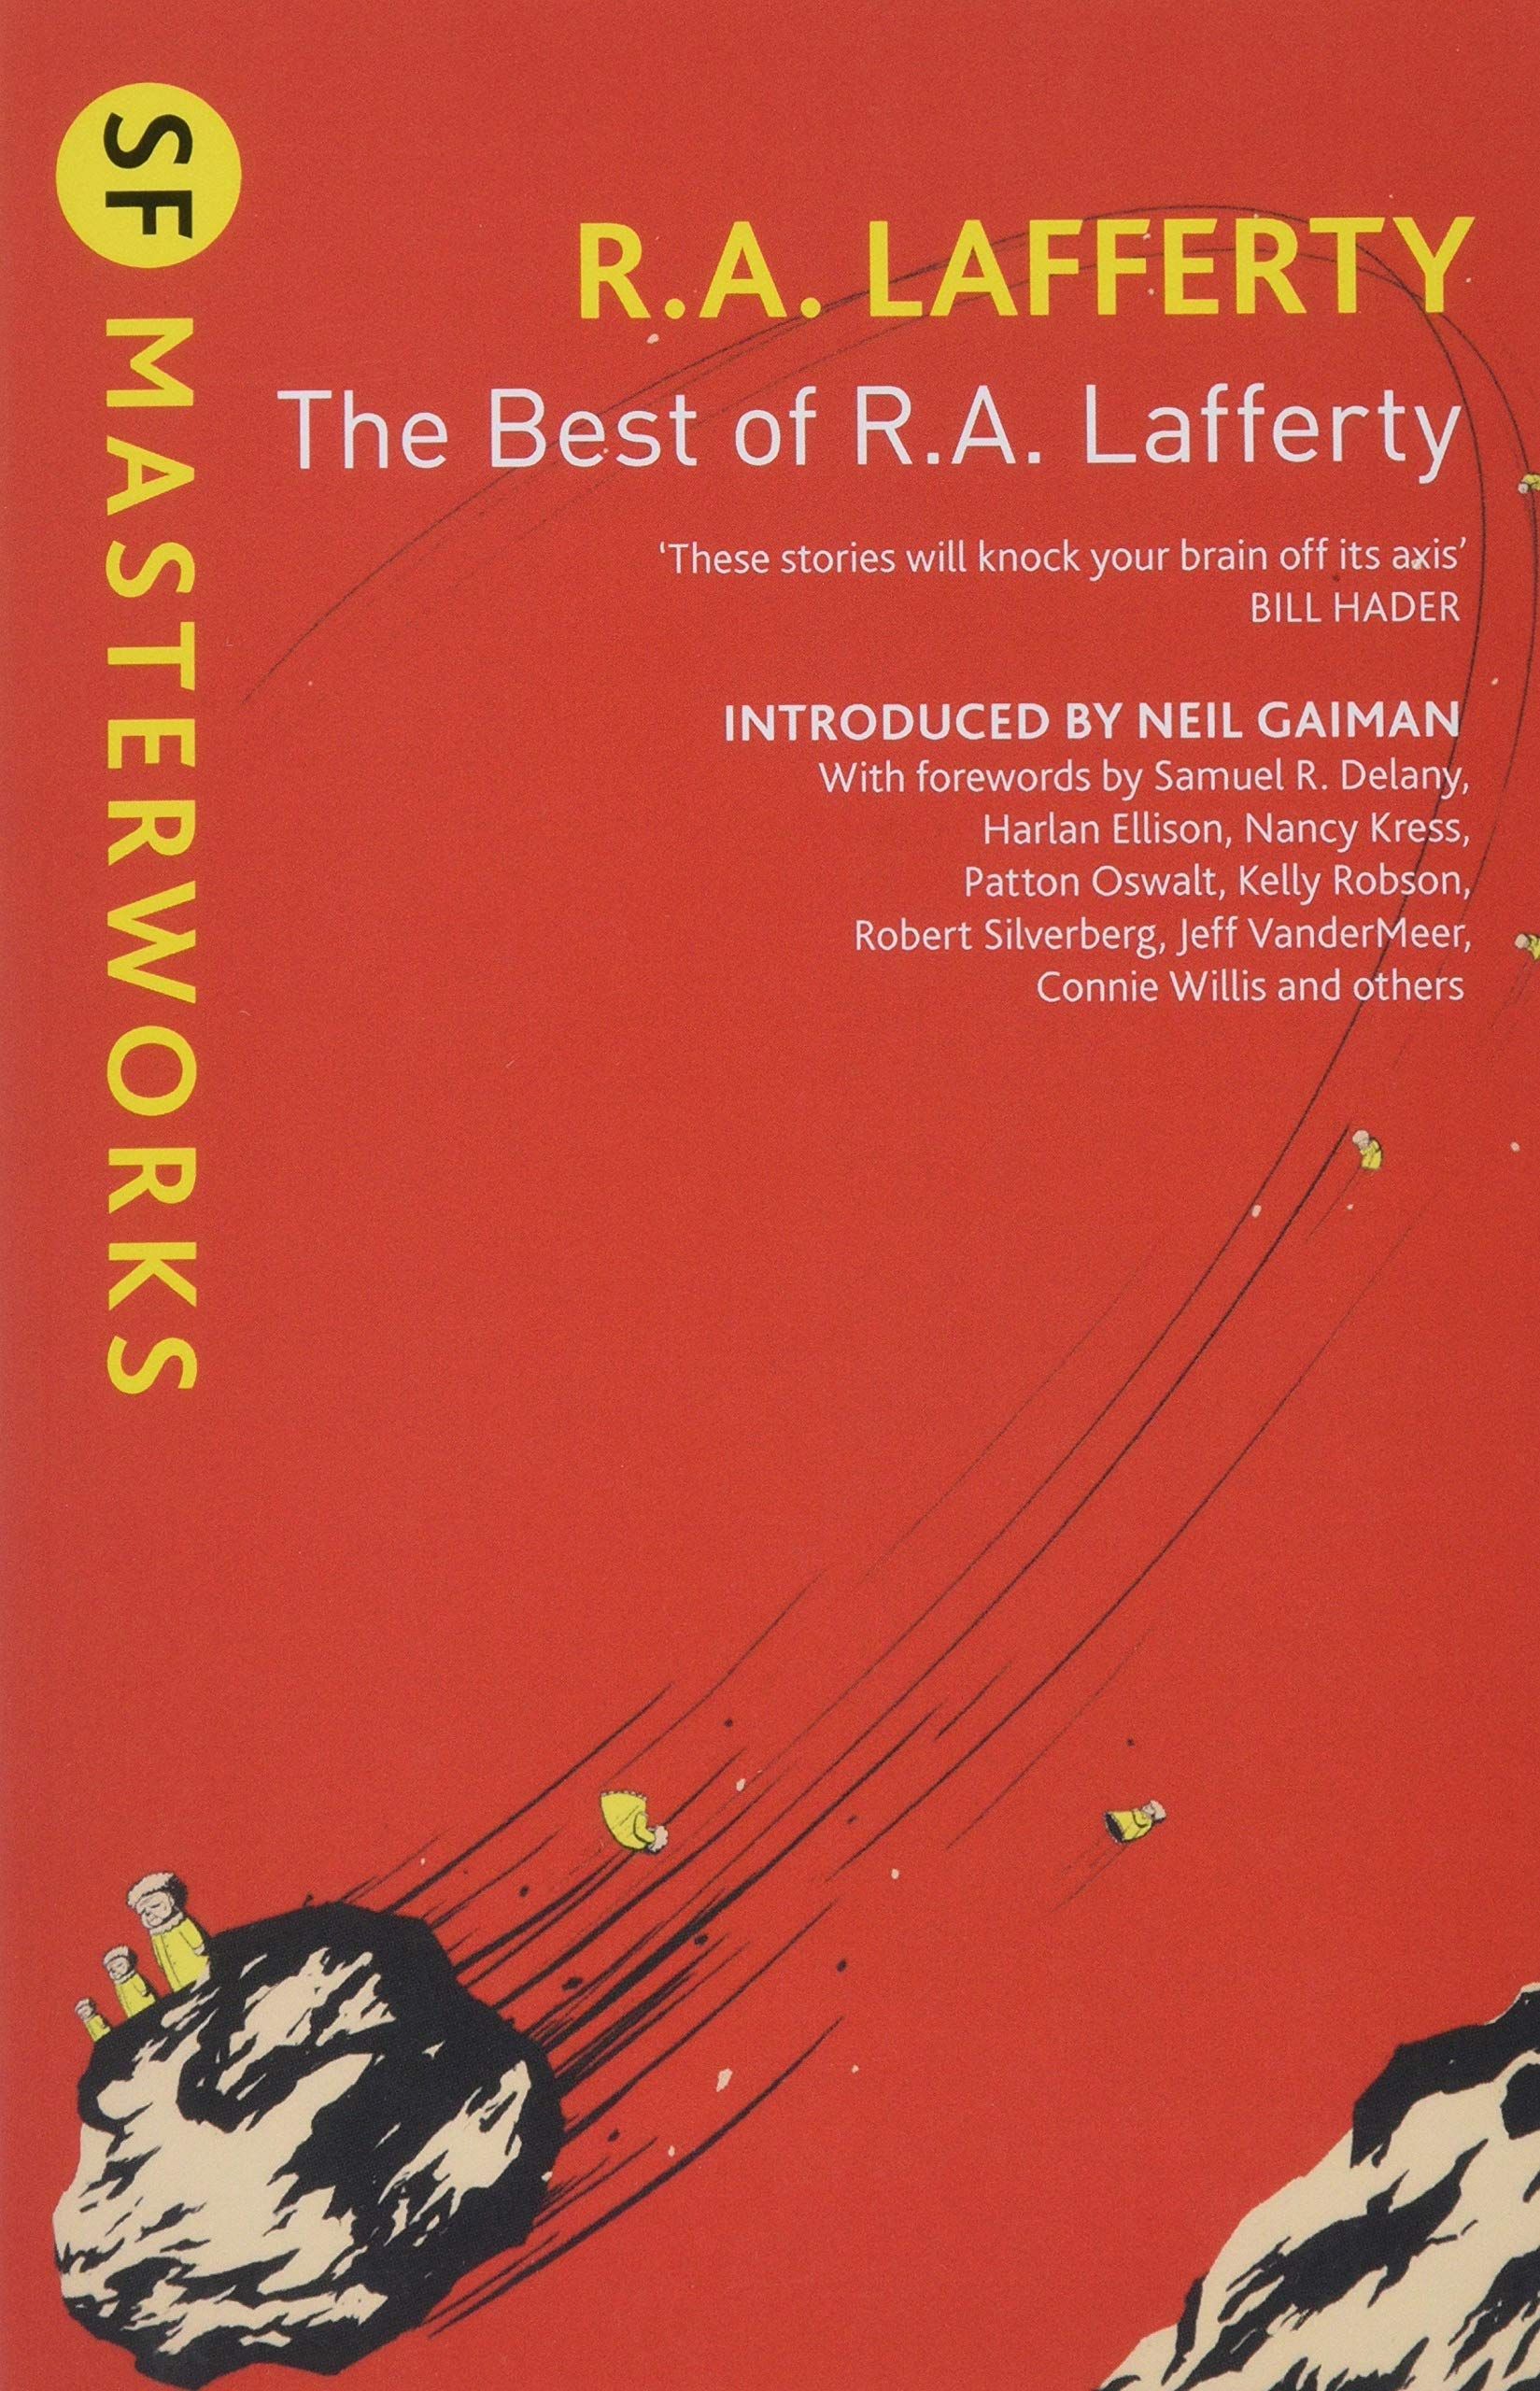 Such Abnormal Activity: On “The Best of R. A. Lafferty”